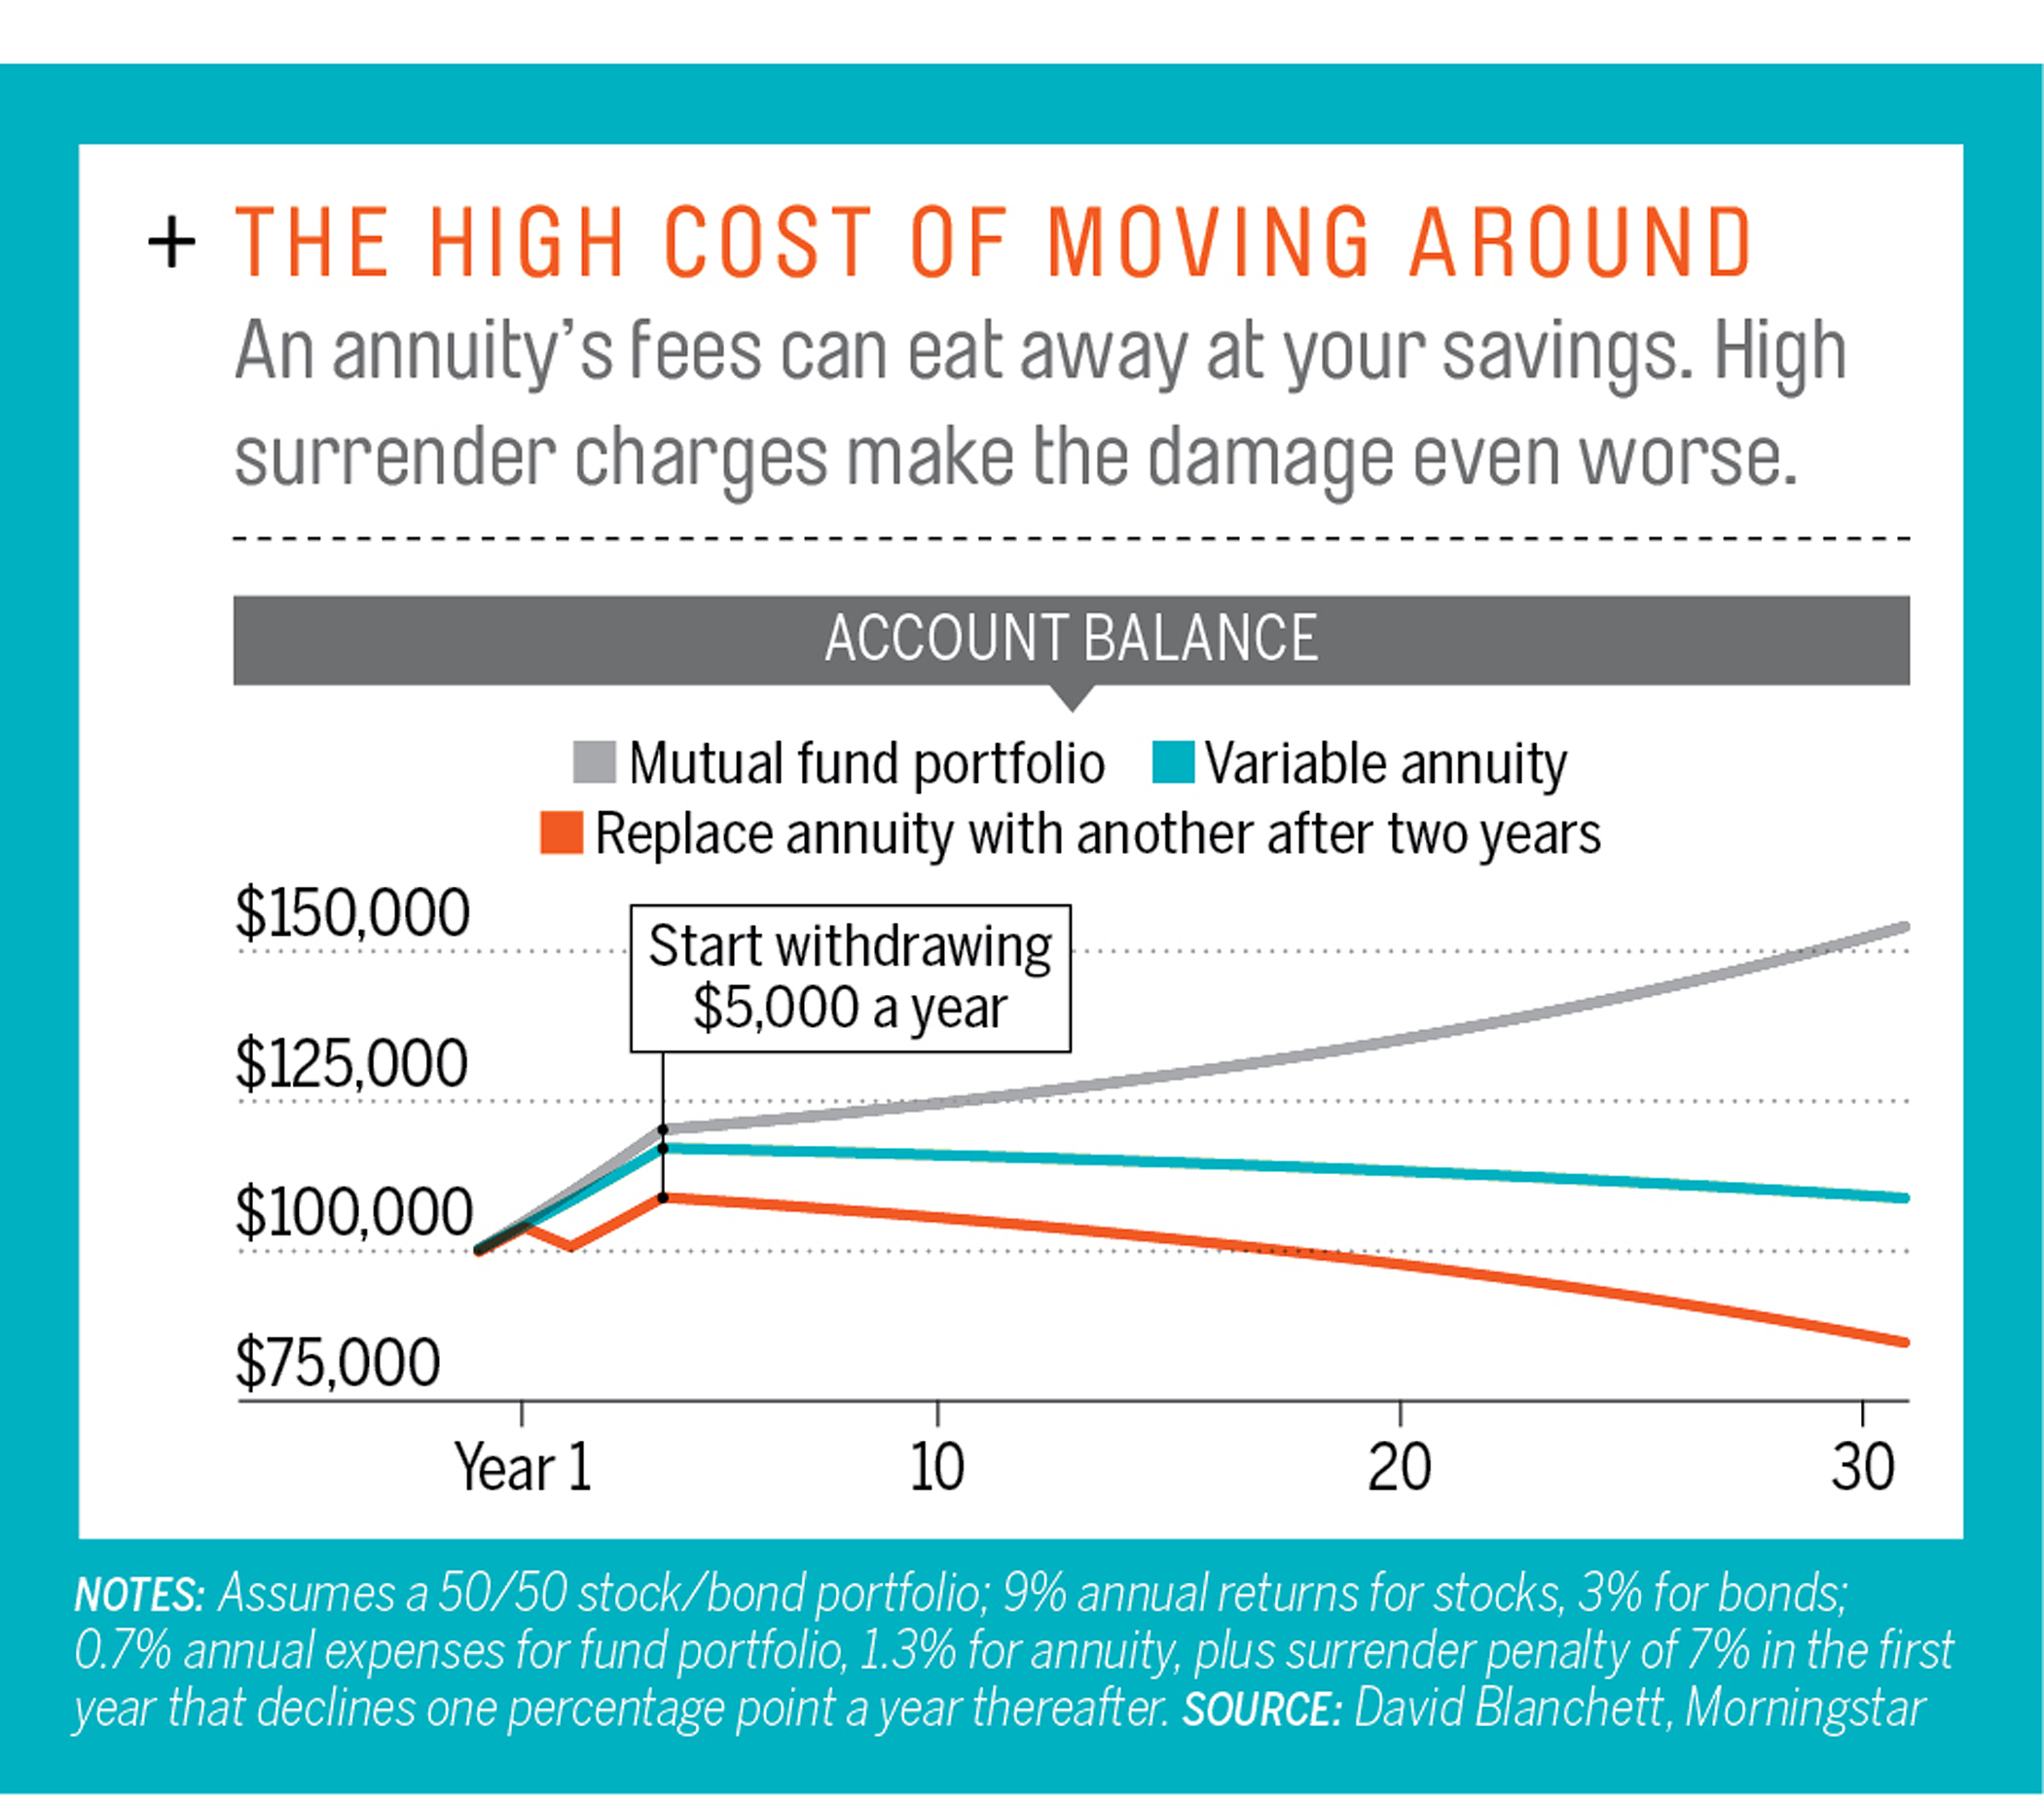 The High Cost of Moving Around